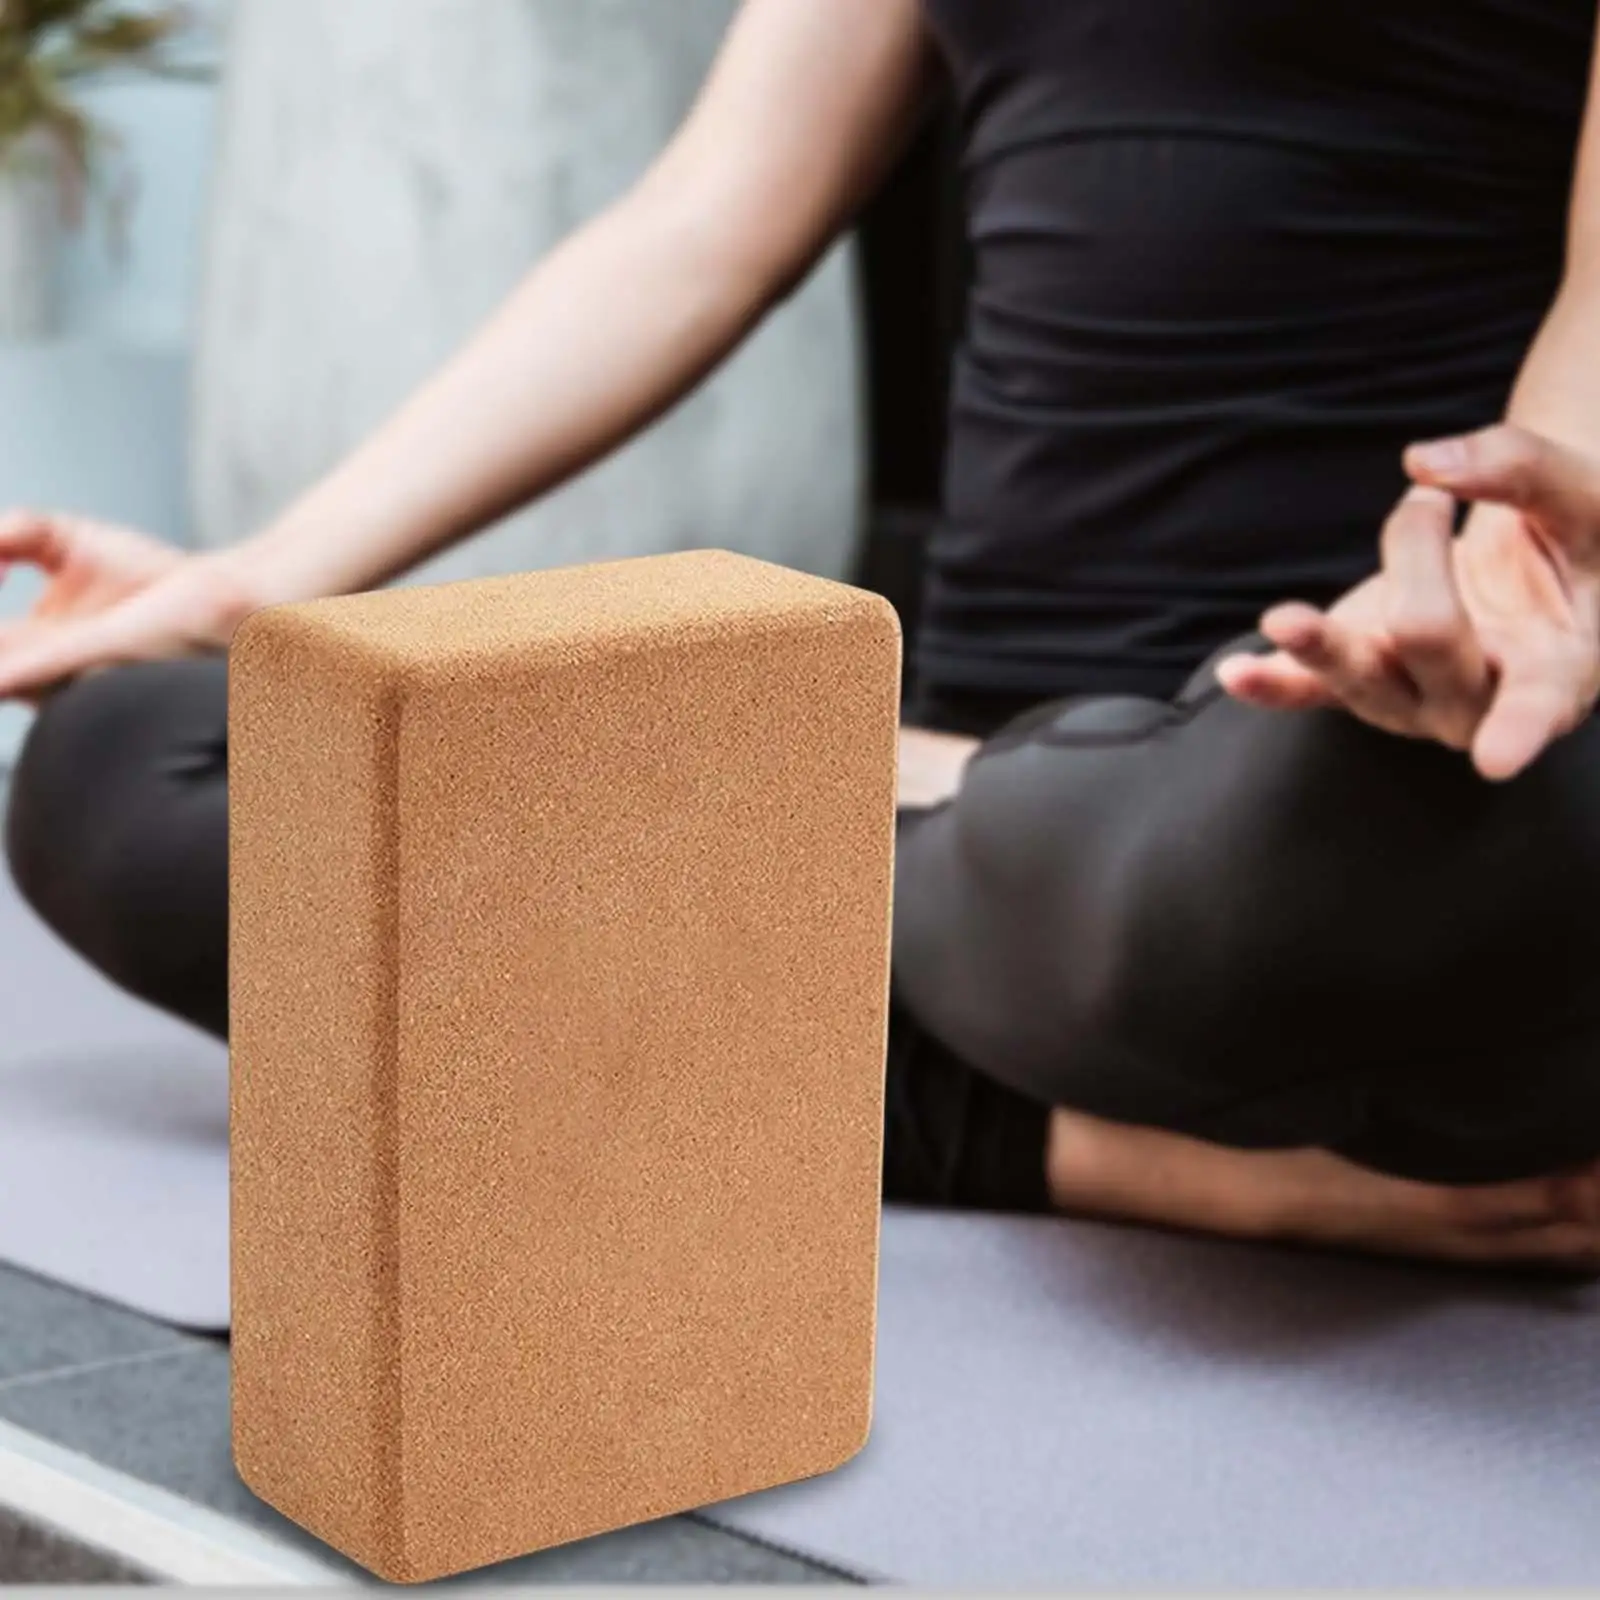 Cork Yoga Block Single Block Pilates Non Slip Meditation Body Building Exercise Brick for Fitness Gym Indoor Sports Workout Home